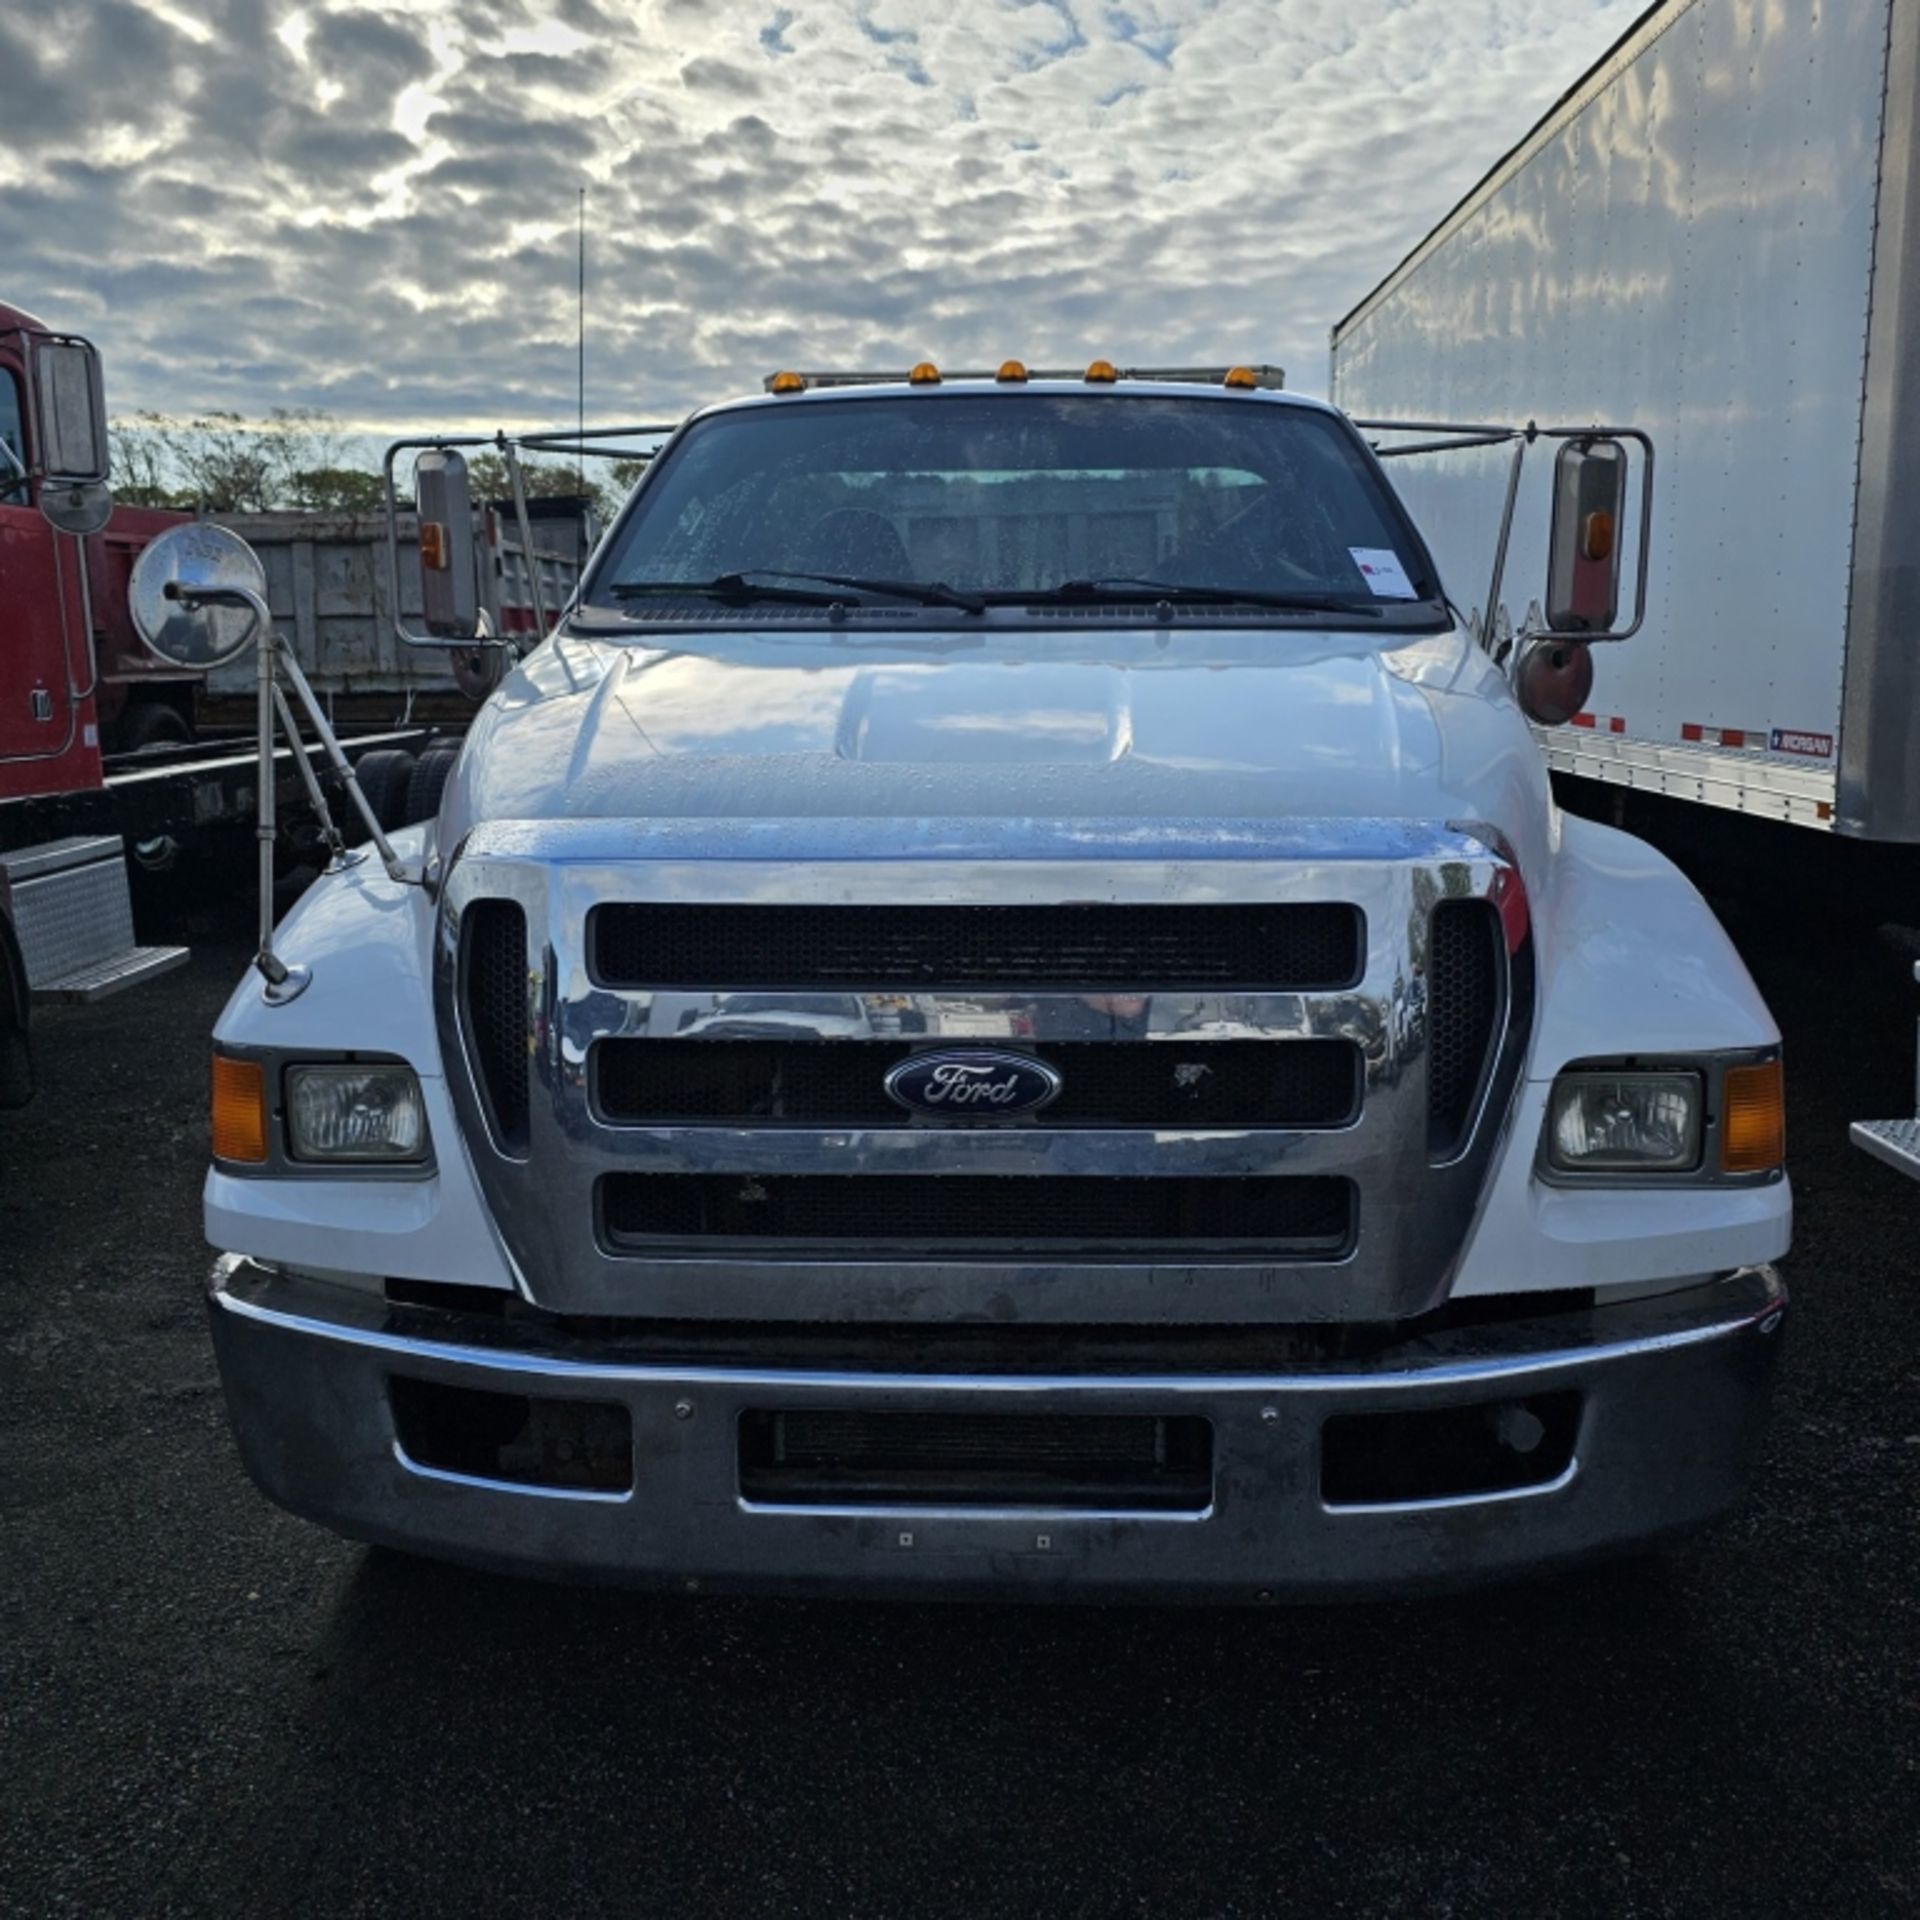 2012 Ford Ramp Truck - Image 3 of 11